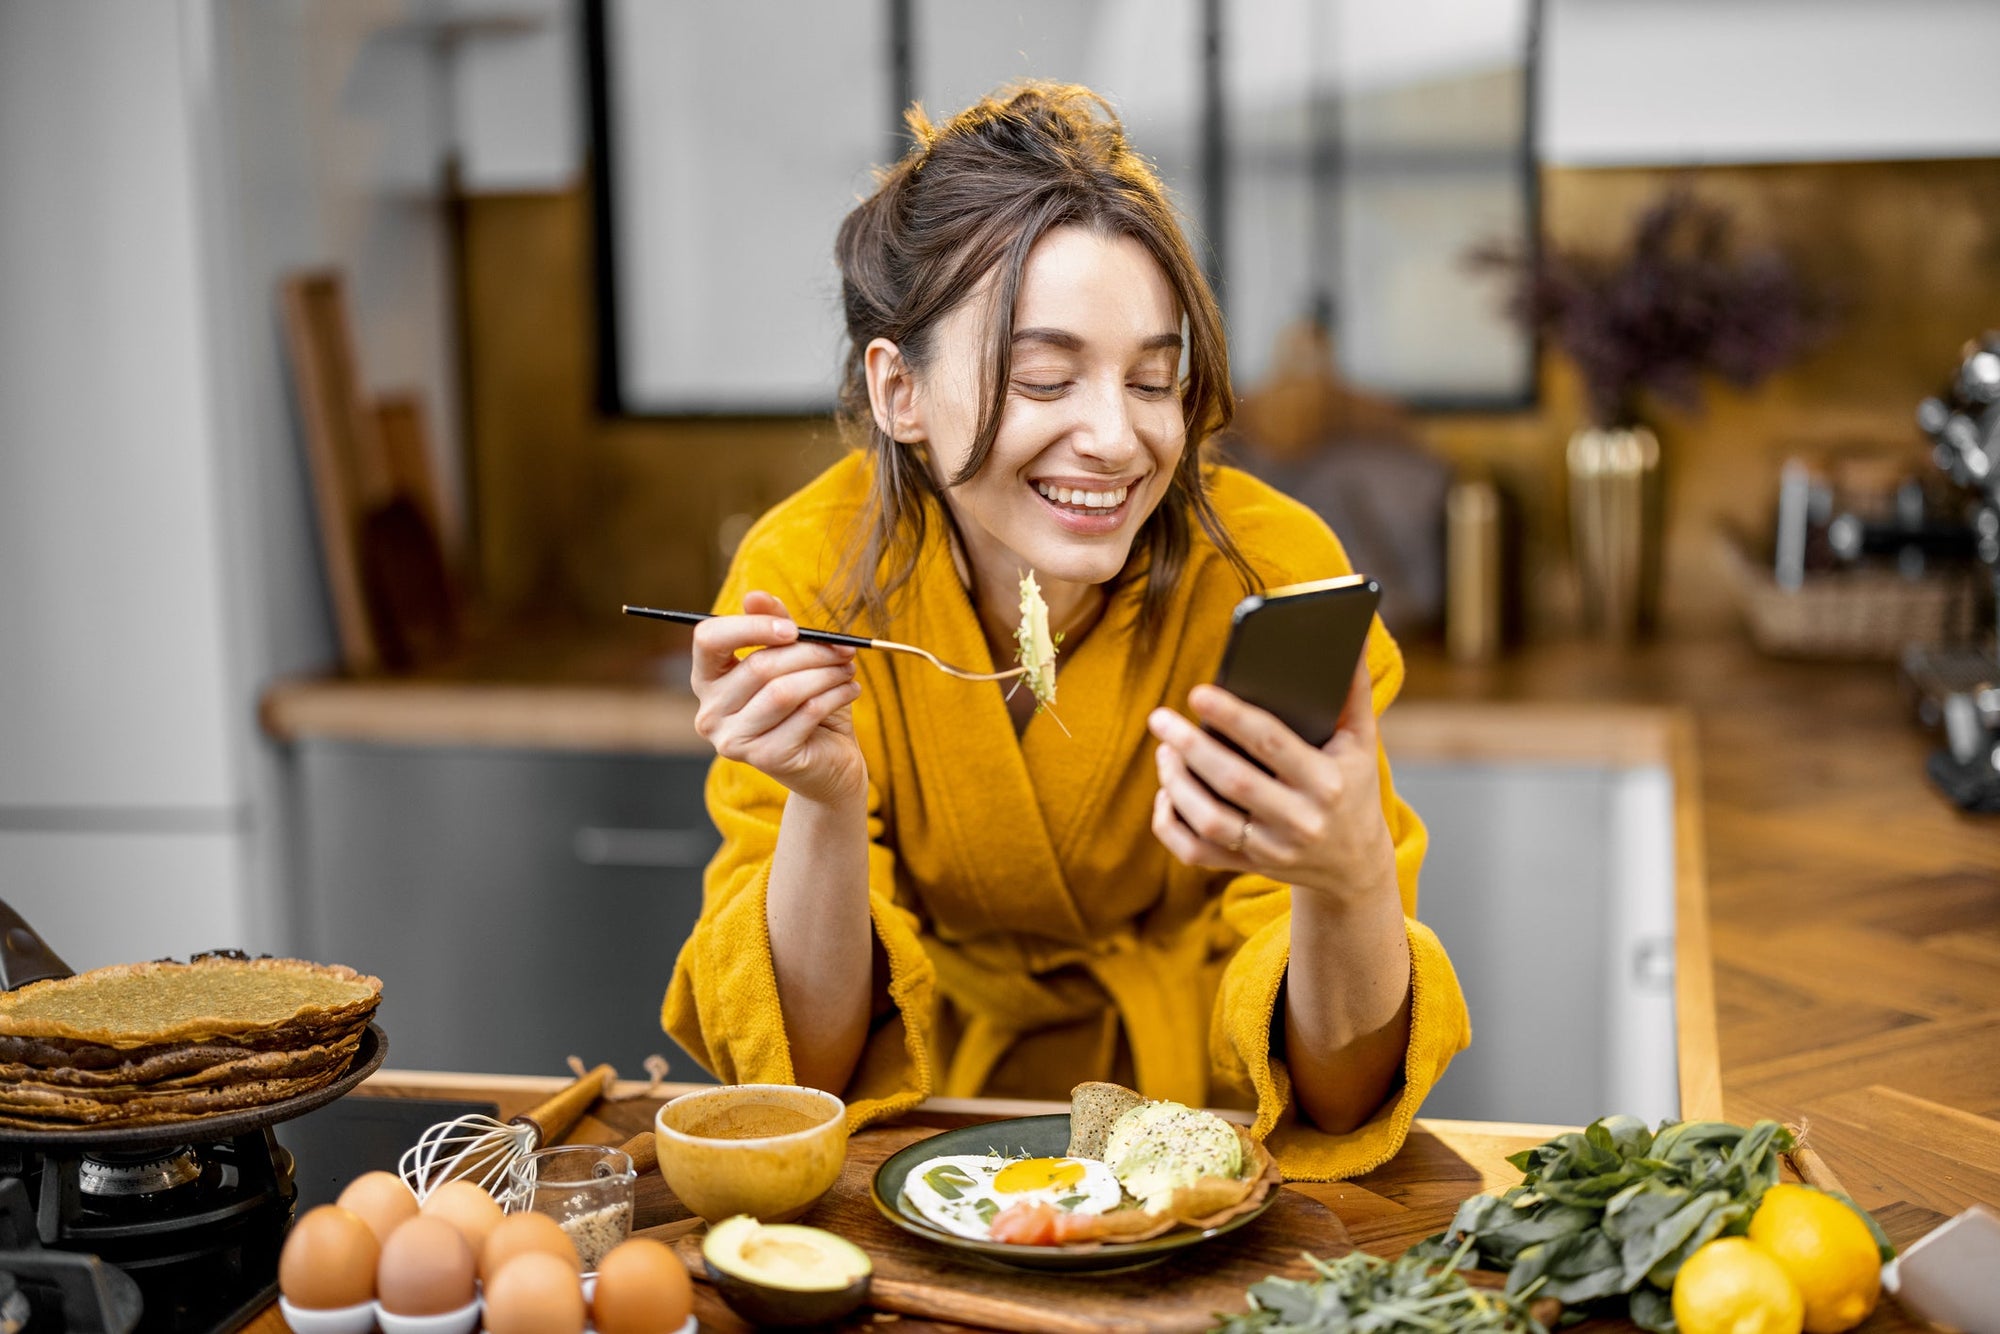 A young woman checking her phone while enjoying a healthy no-bloat breakfast of eggs.